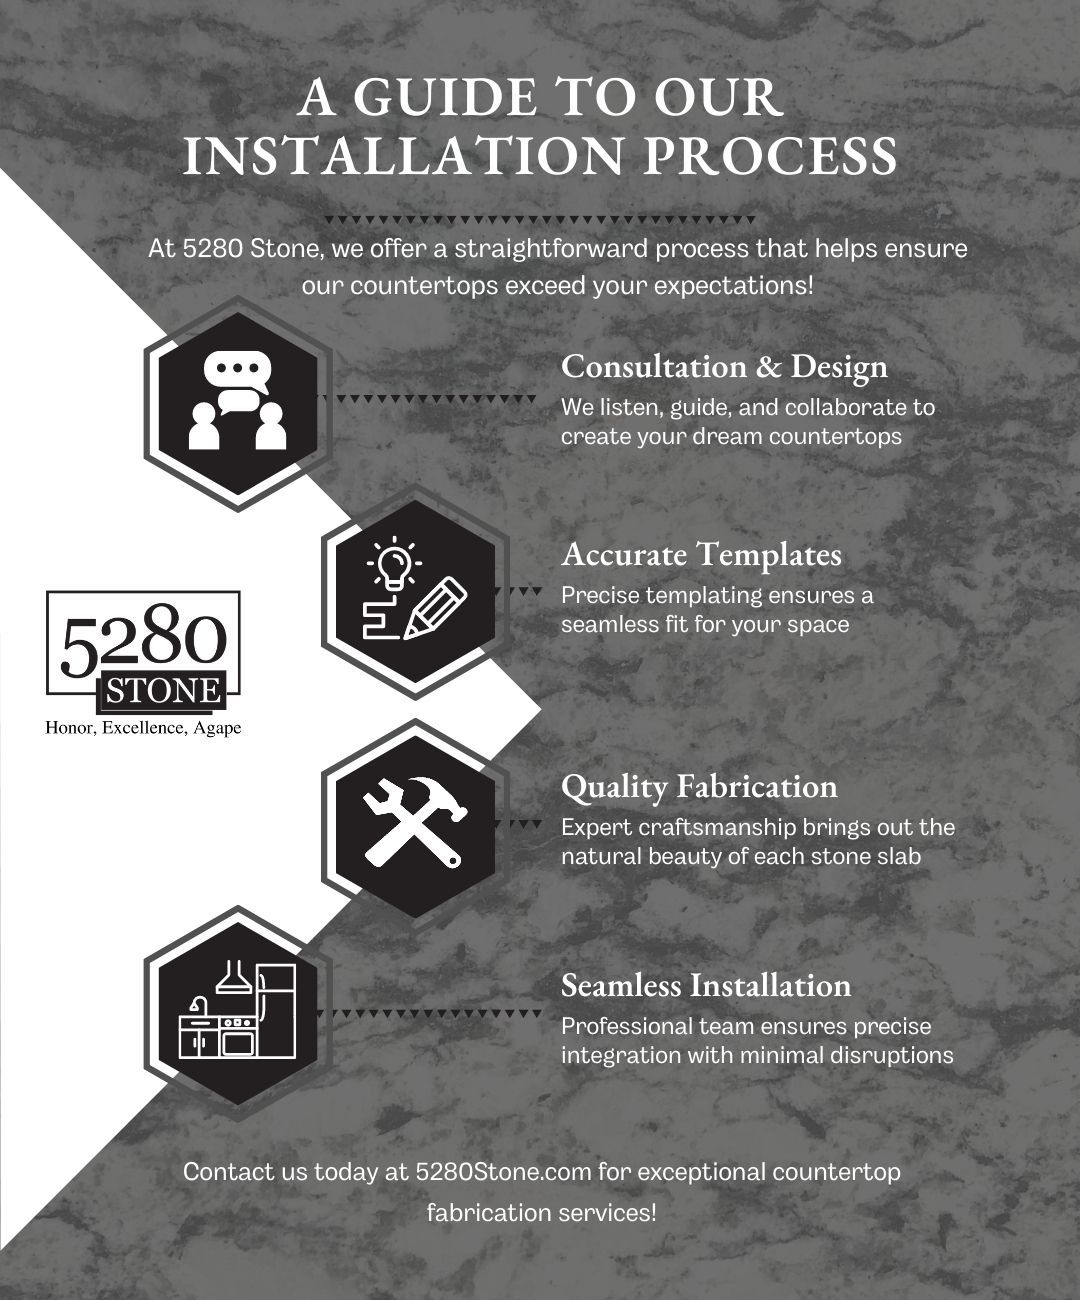 M36710 - Infographic - A Guide to Our Installation Process (1).jpg